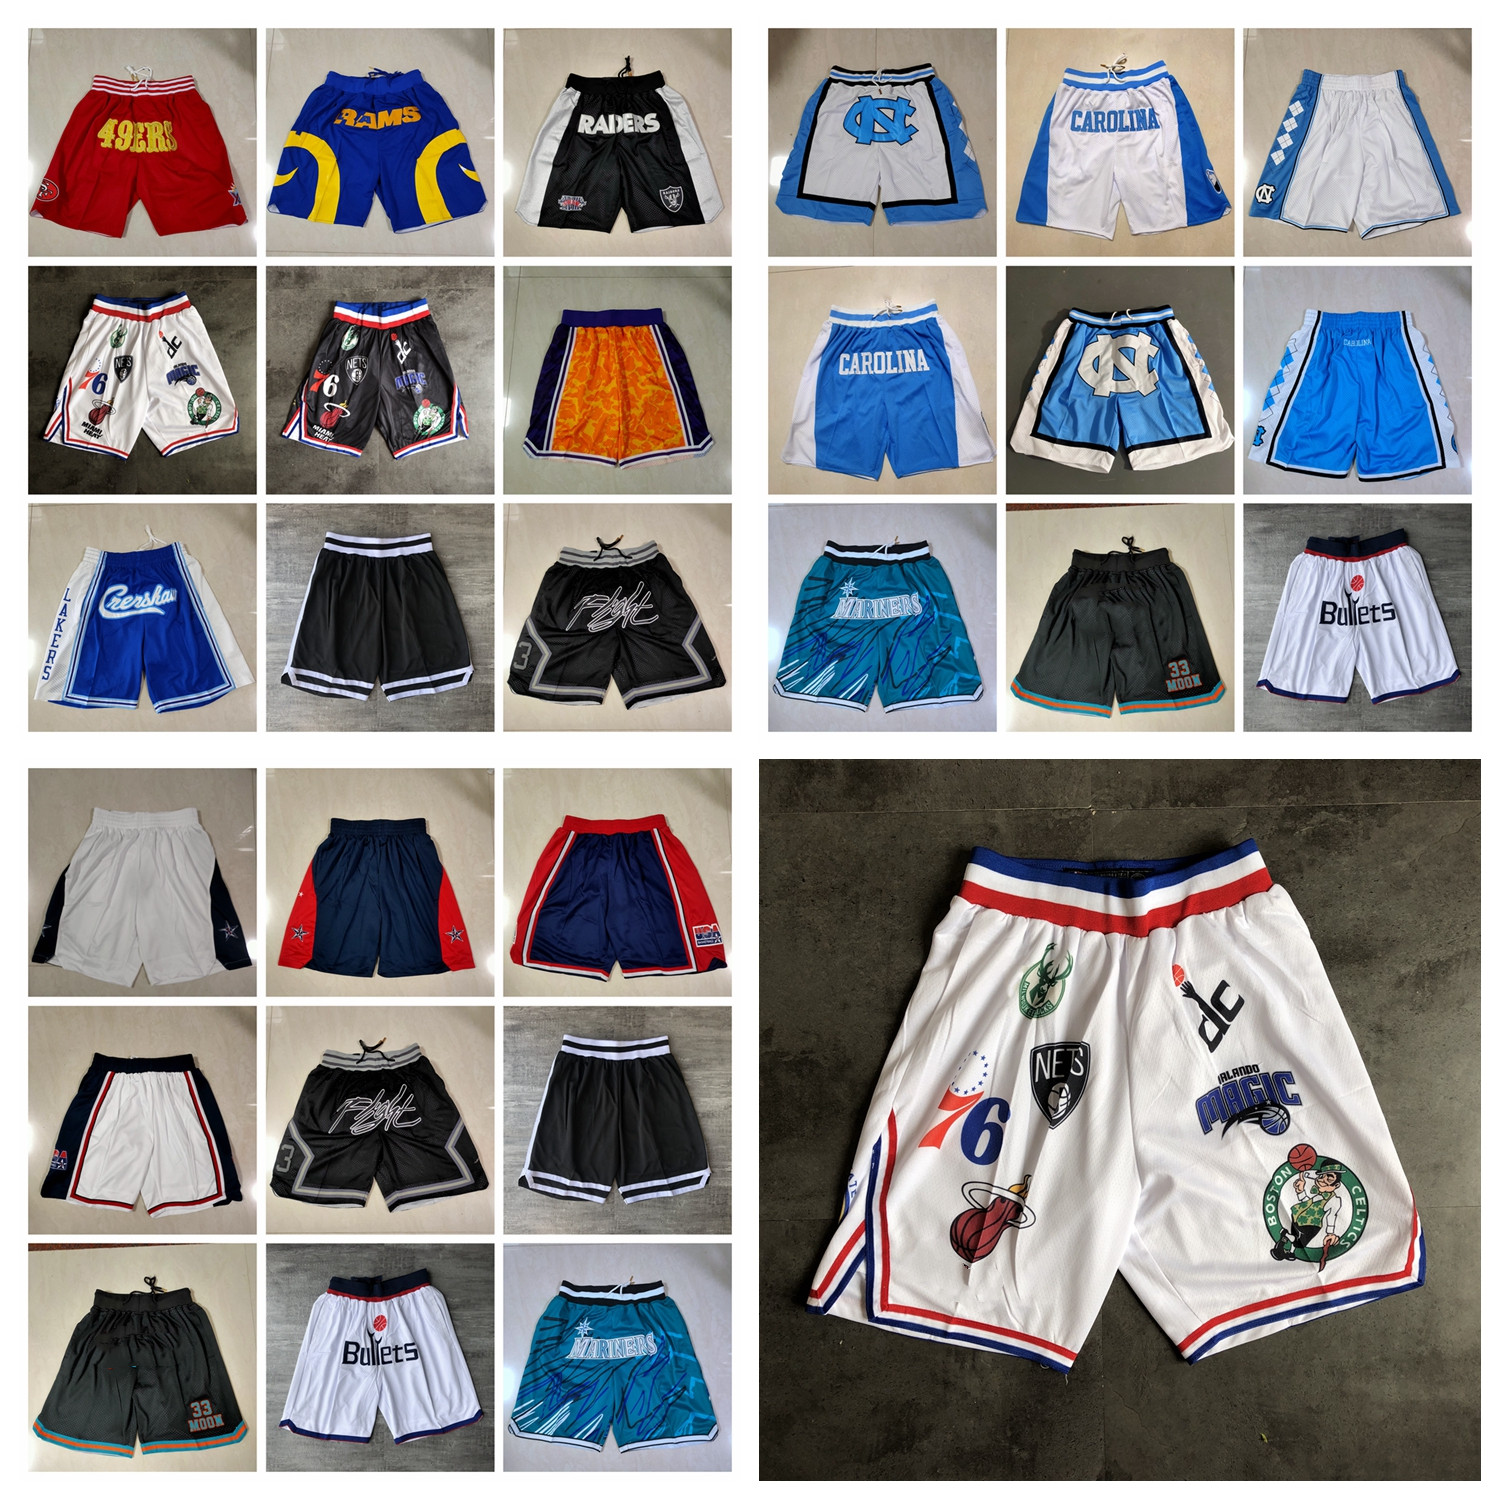 

Men Team Basketball Shorts Just Don Short Co-Branded Hip Pop Sport Wear Pant With Pocket Zipper Sweatpants Red Blue Black White Yellow Color Stitched Man Size S-XXXL, As photo